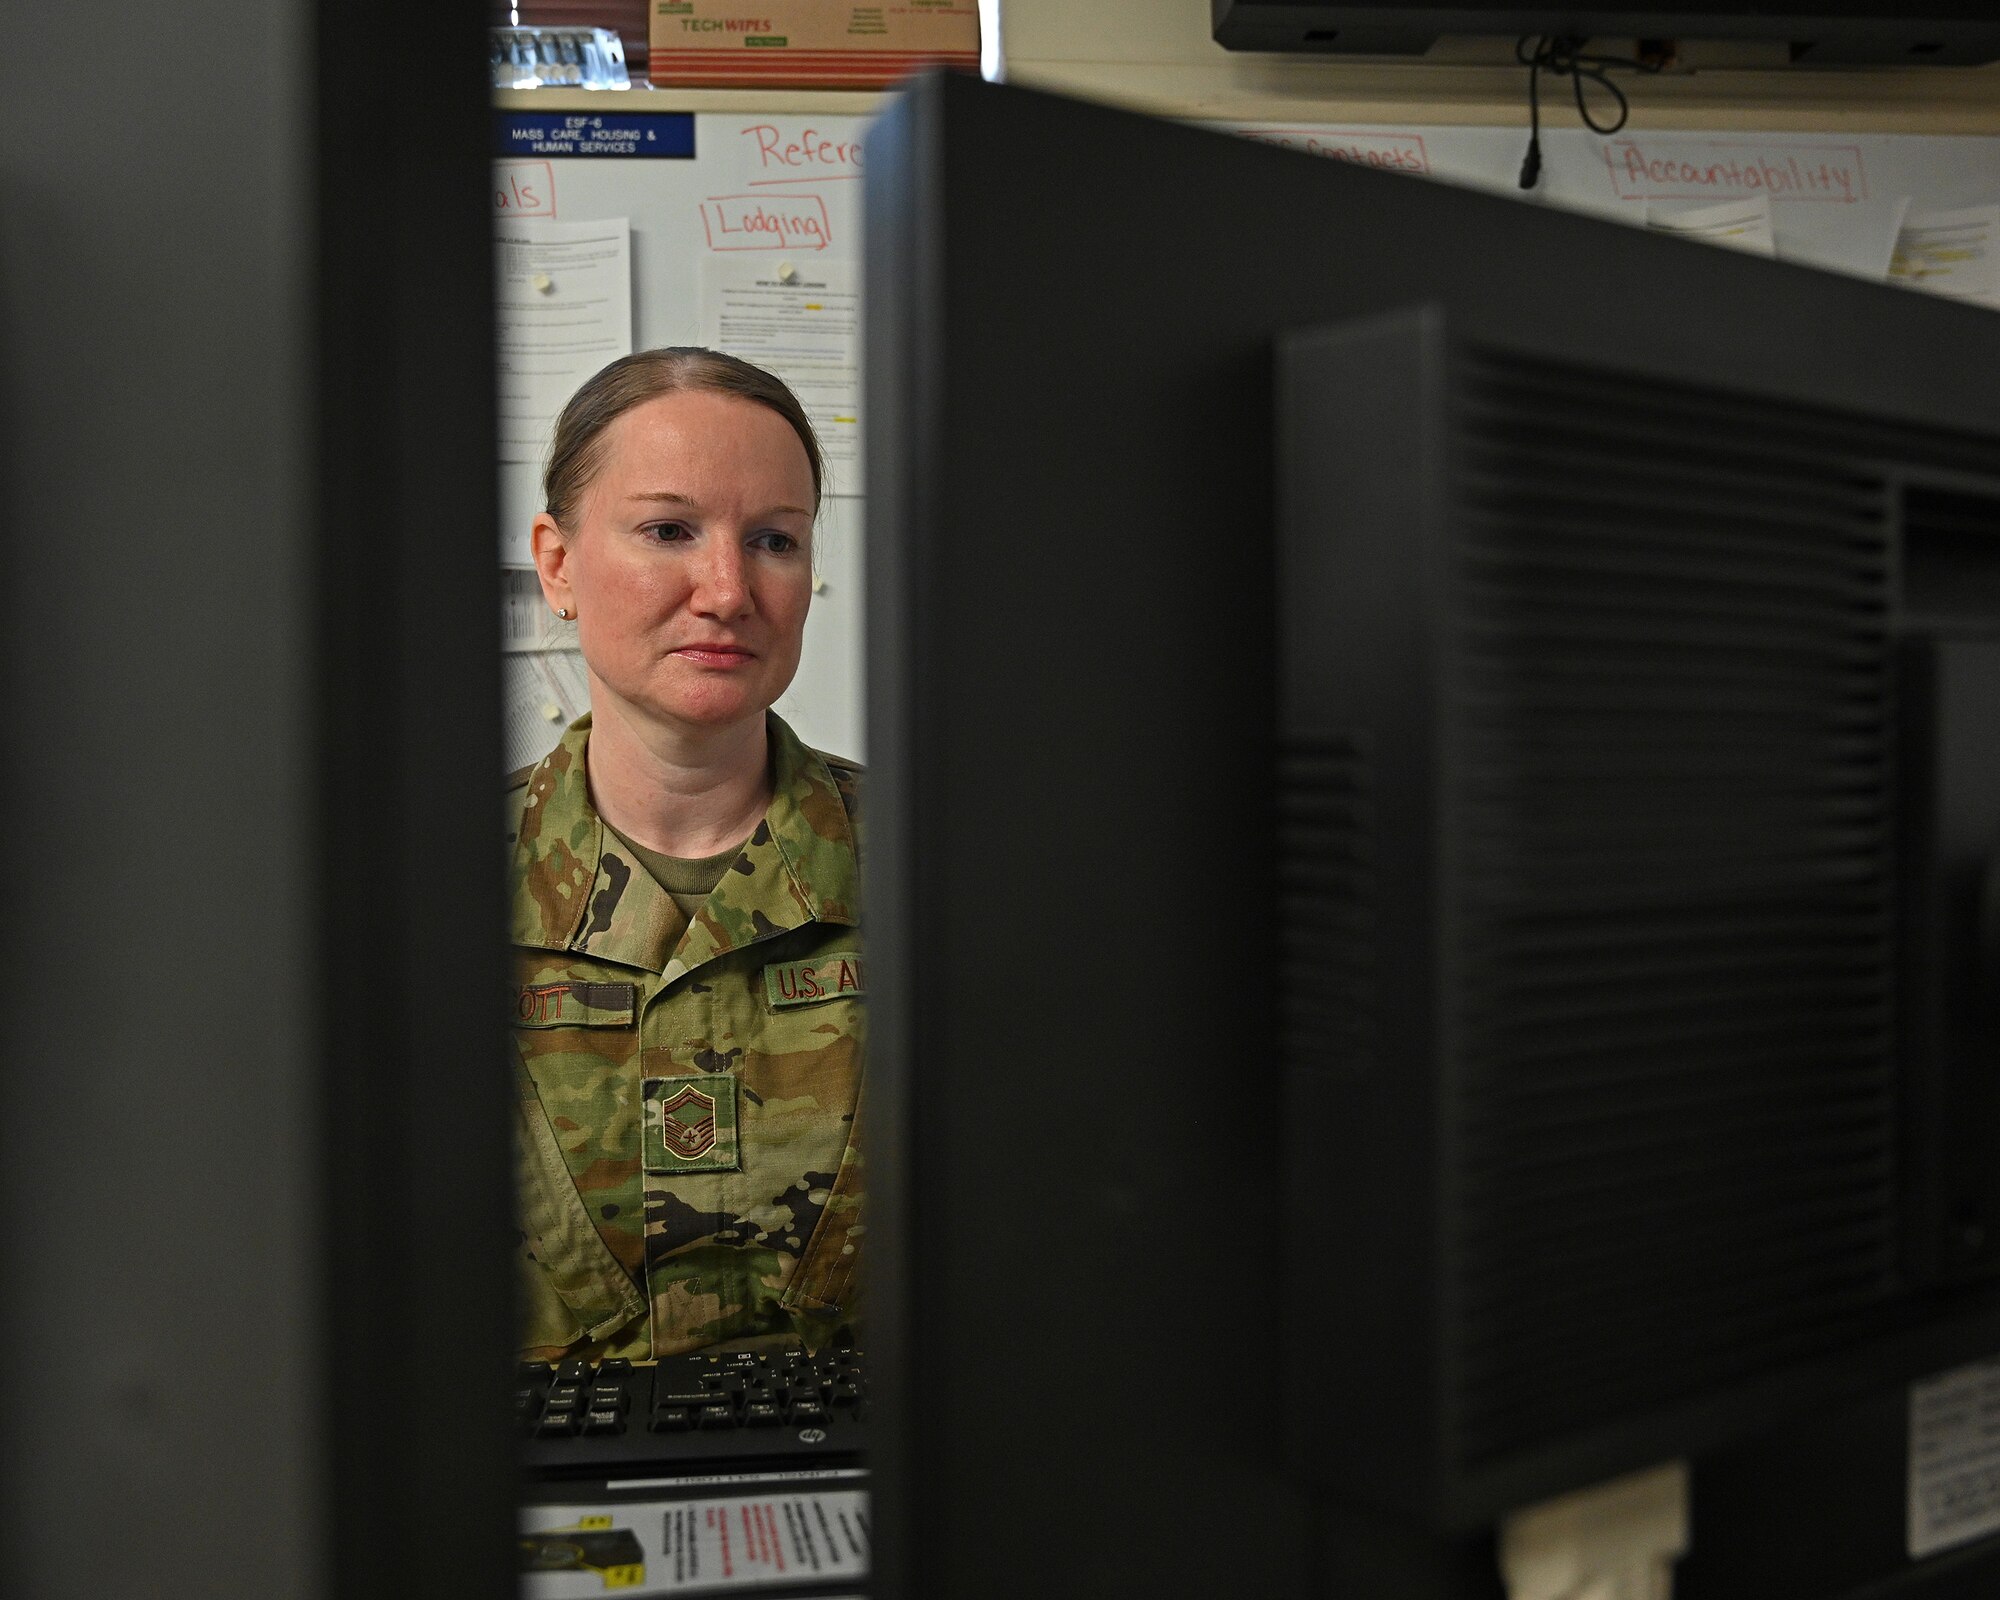 U.S. Air Force Senior Master Sgt. Stephanie Scott, 175th Wing Emergency Operations Center manager, sits at her computer in the Emergency Operations Center at Warfield Air National Guard Base, Middle River, Md., May 21, 2020. The 175th Wing established the EOC during the state's response to the COVID-19 pandemic.